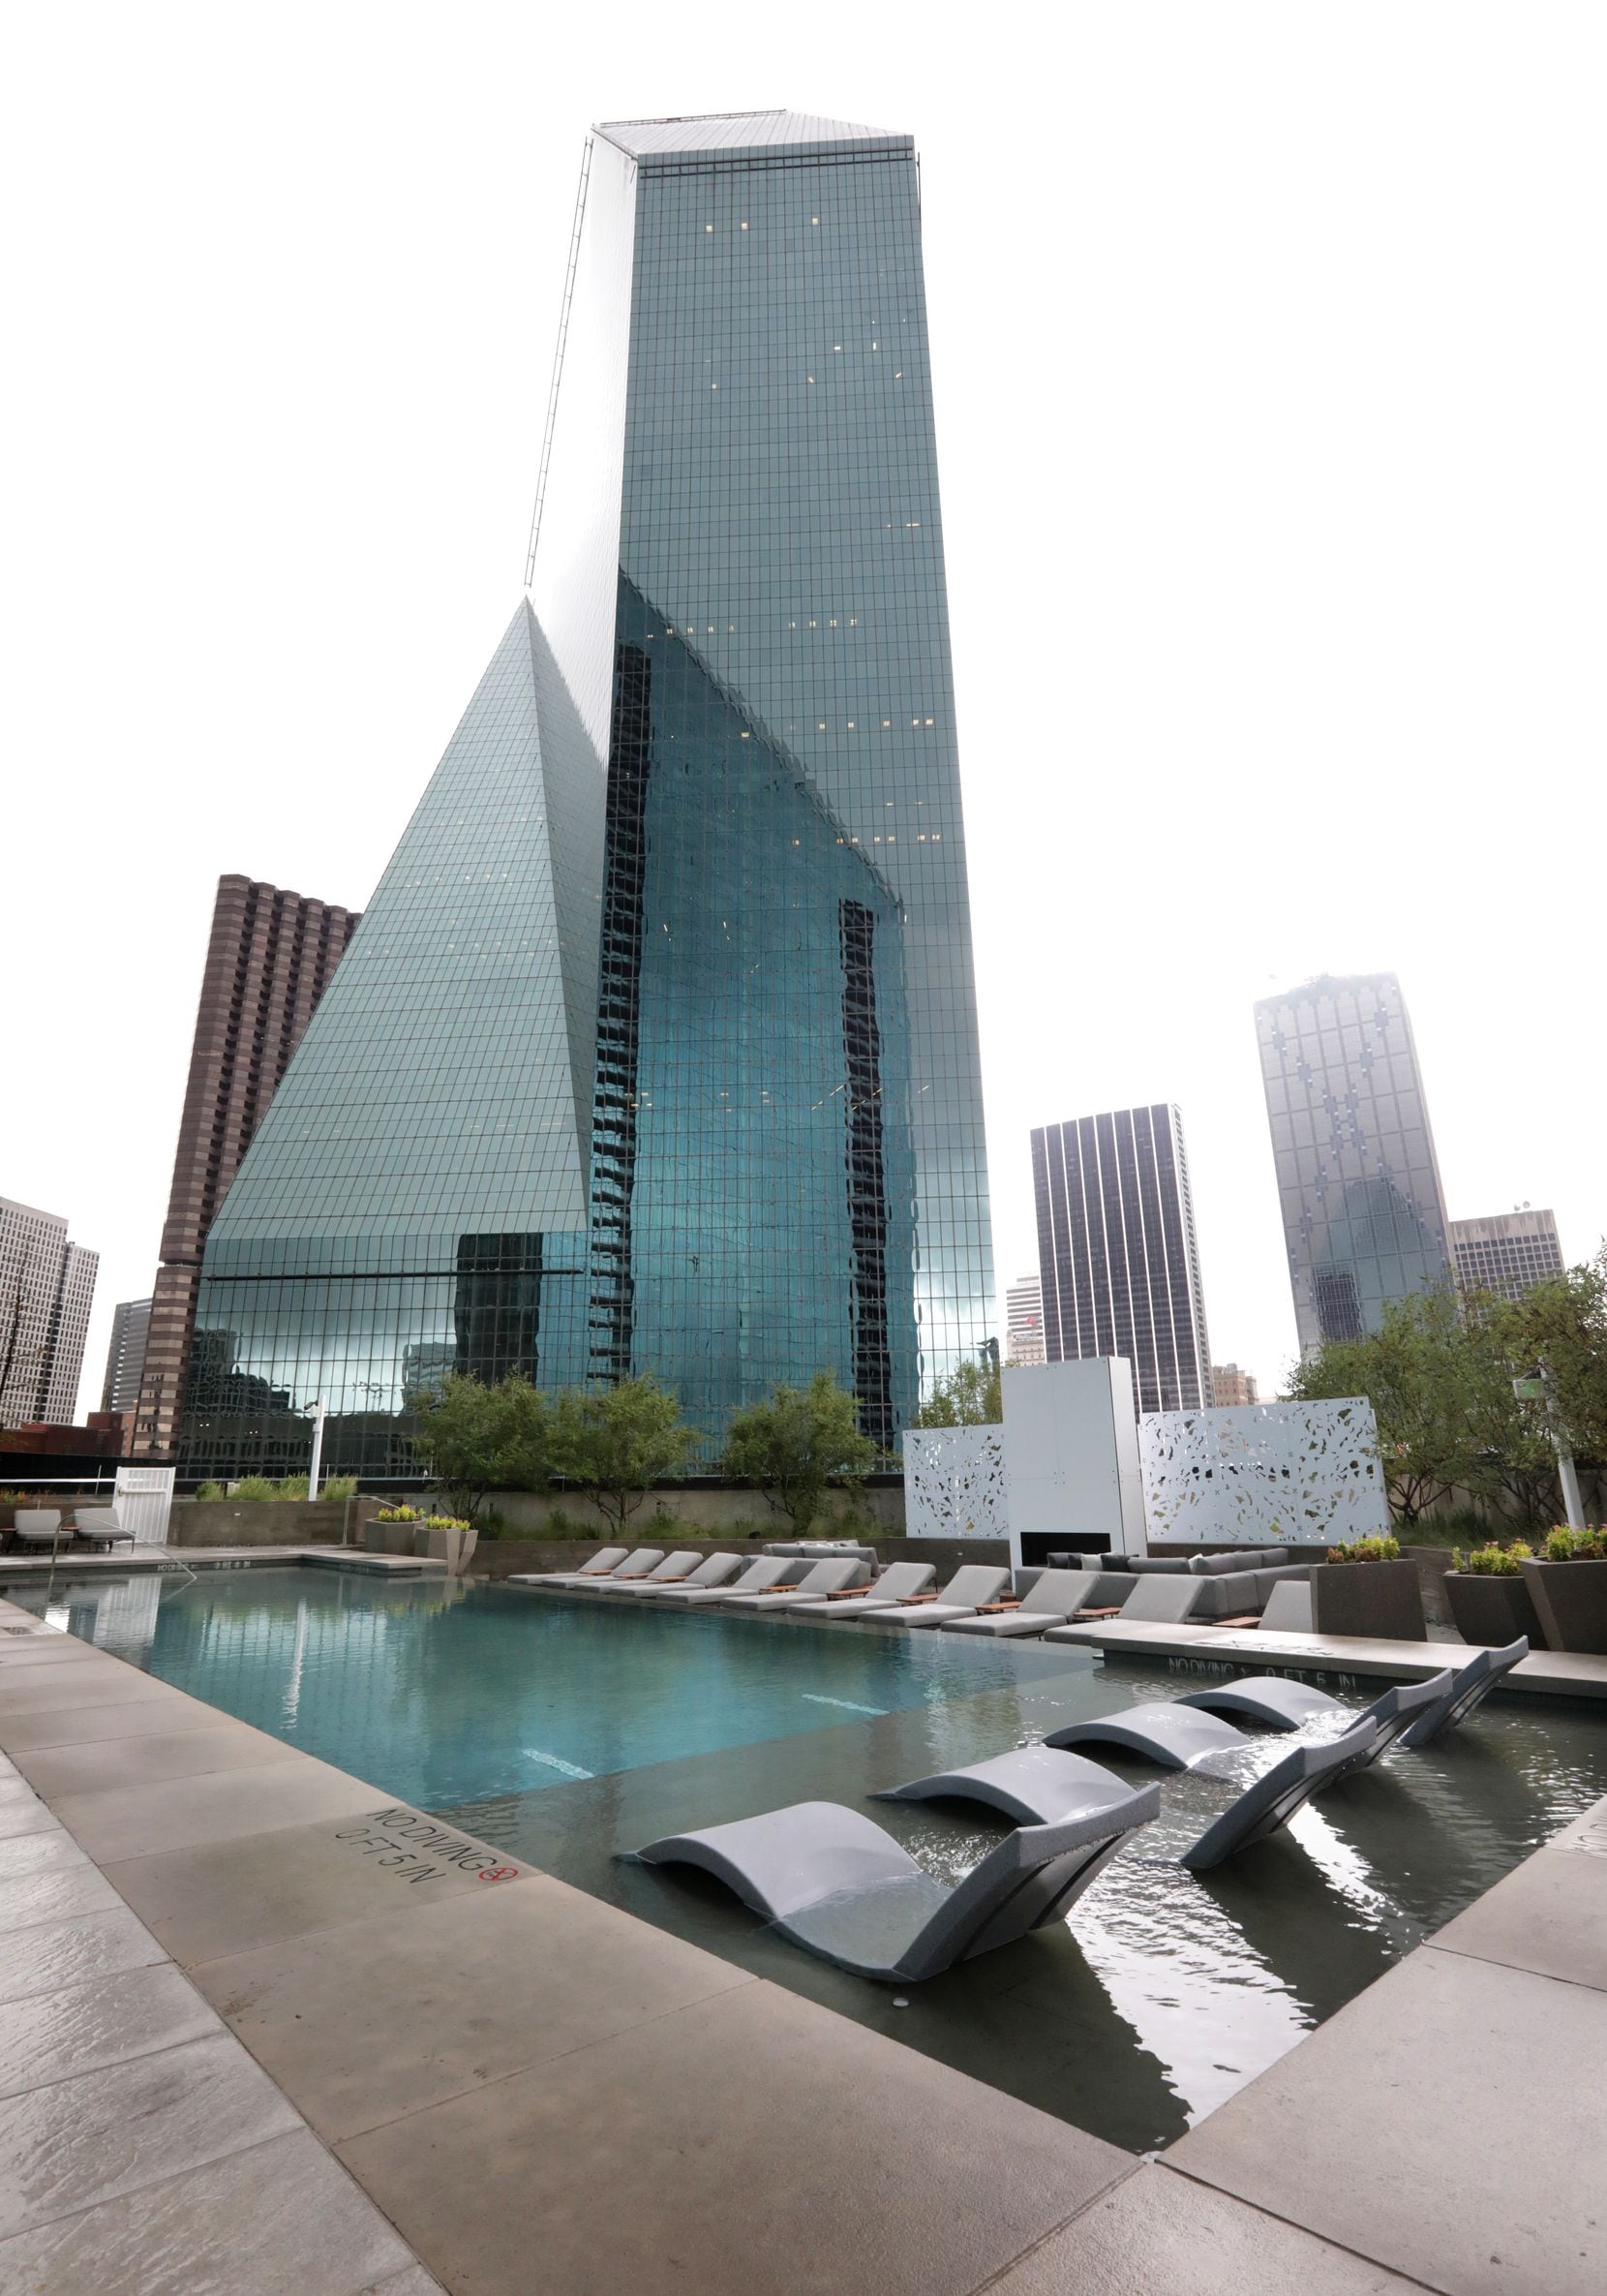 The pool at Amli Fountain Place gives a closeup view of the original skyscraper next door.